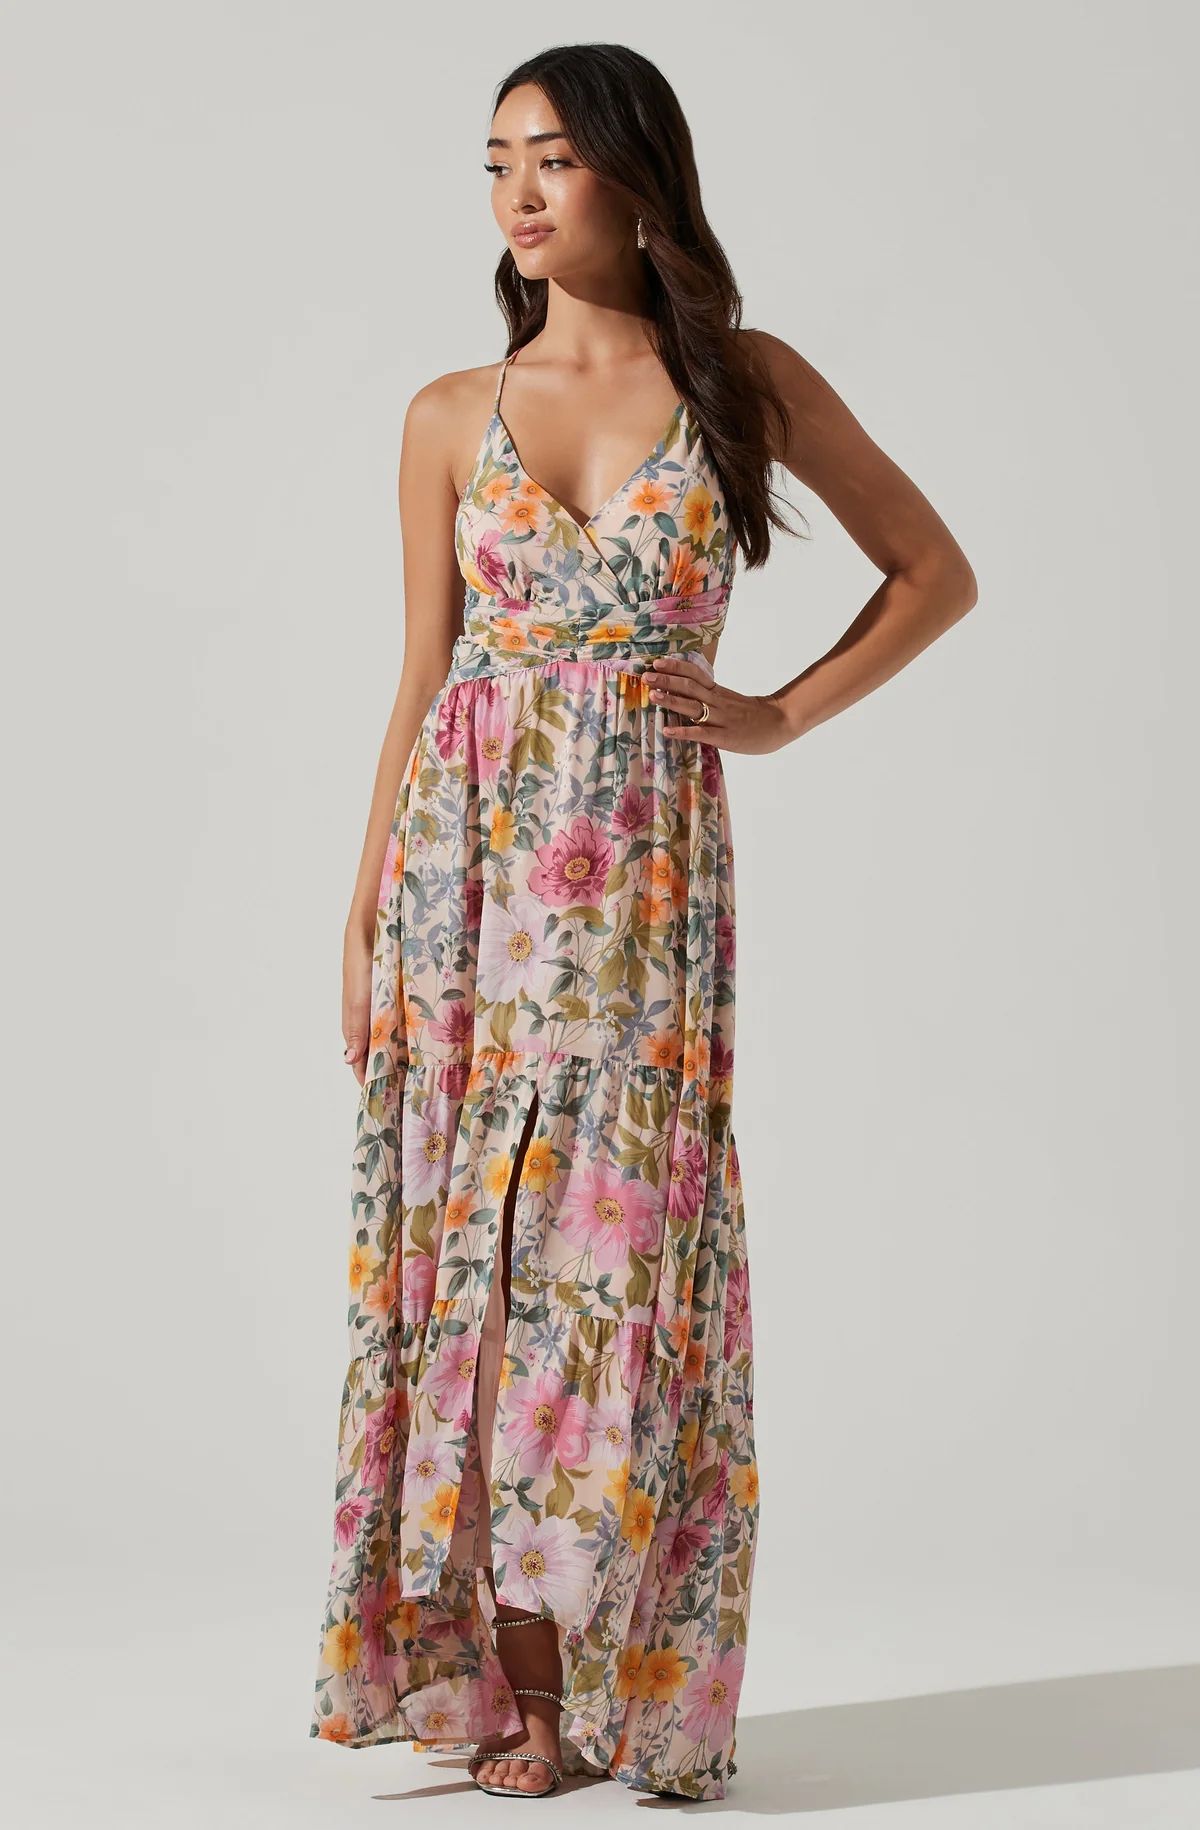 Frolic Floral Cutout Maxi Dress - TAUPE FUCHSIA MULTI FLORAL / XS | ASTR The Label (US)